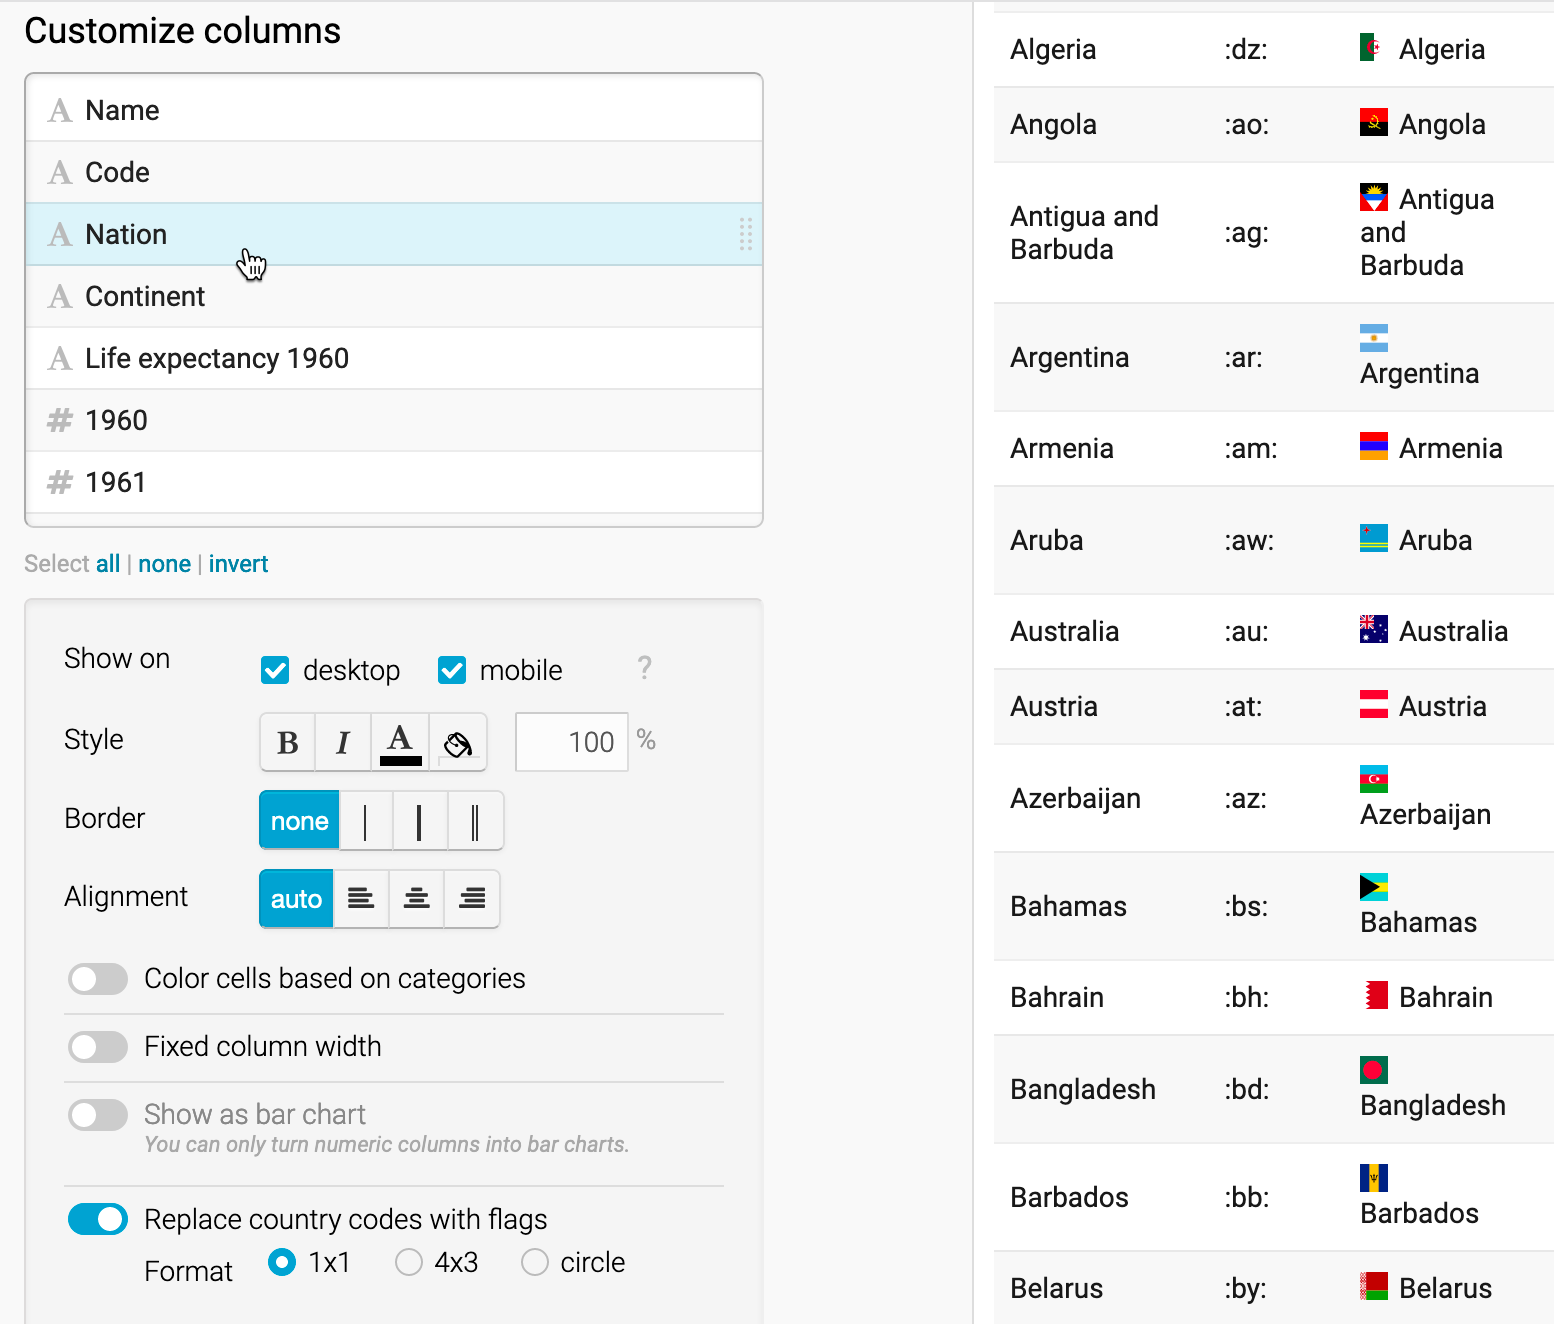 Customize the Nation column and push slider to replace codes with flags.